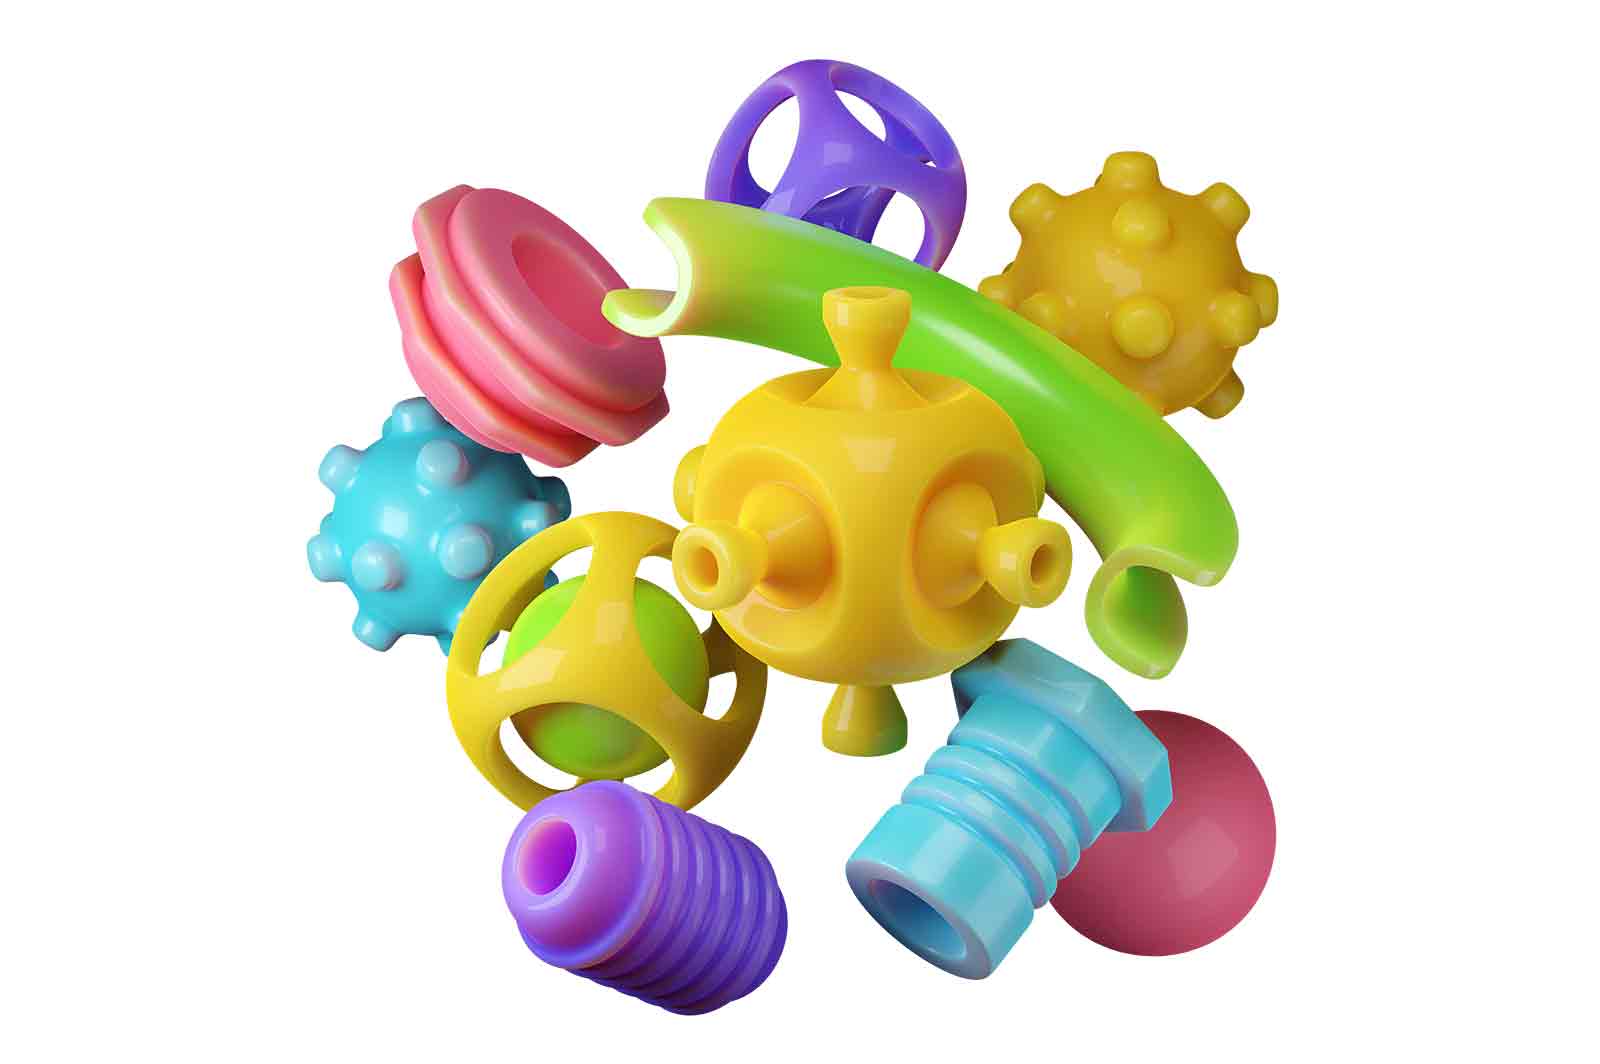 Abstract composition of colourful plastic details of different shapes 3d rendered illustration. Round shaped, gears pipes details. Components of mechanism concept